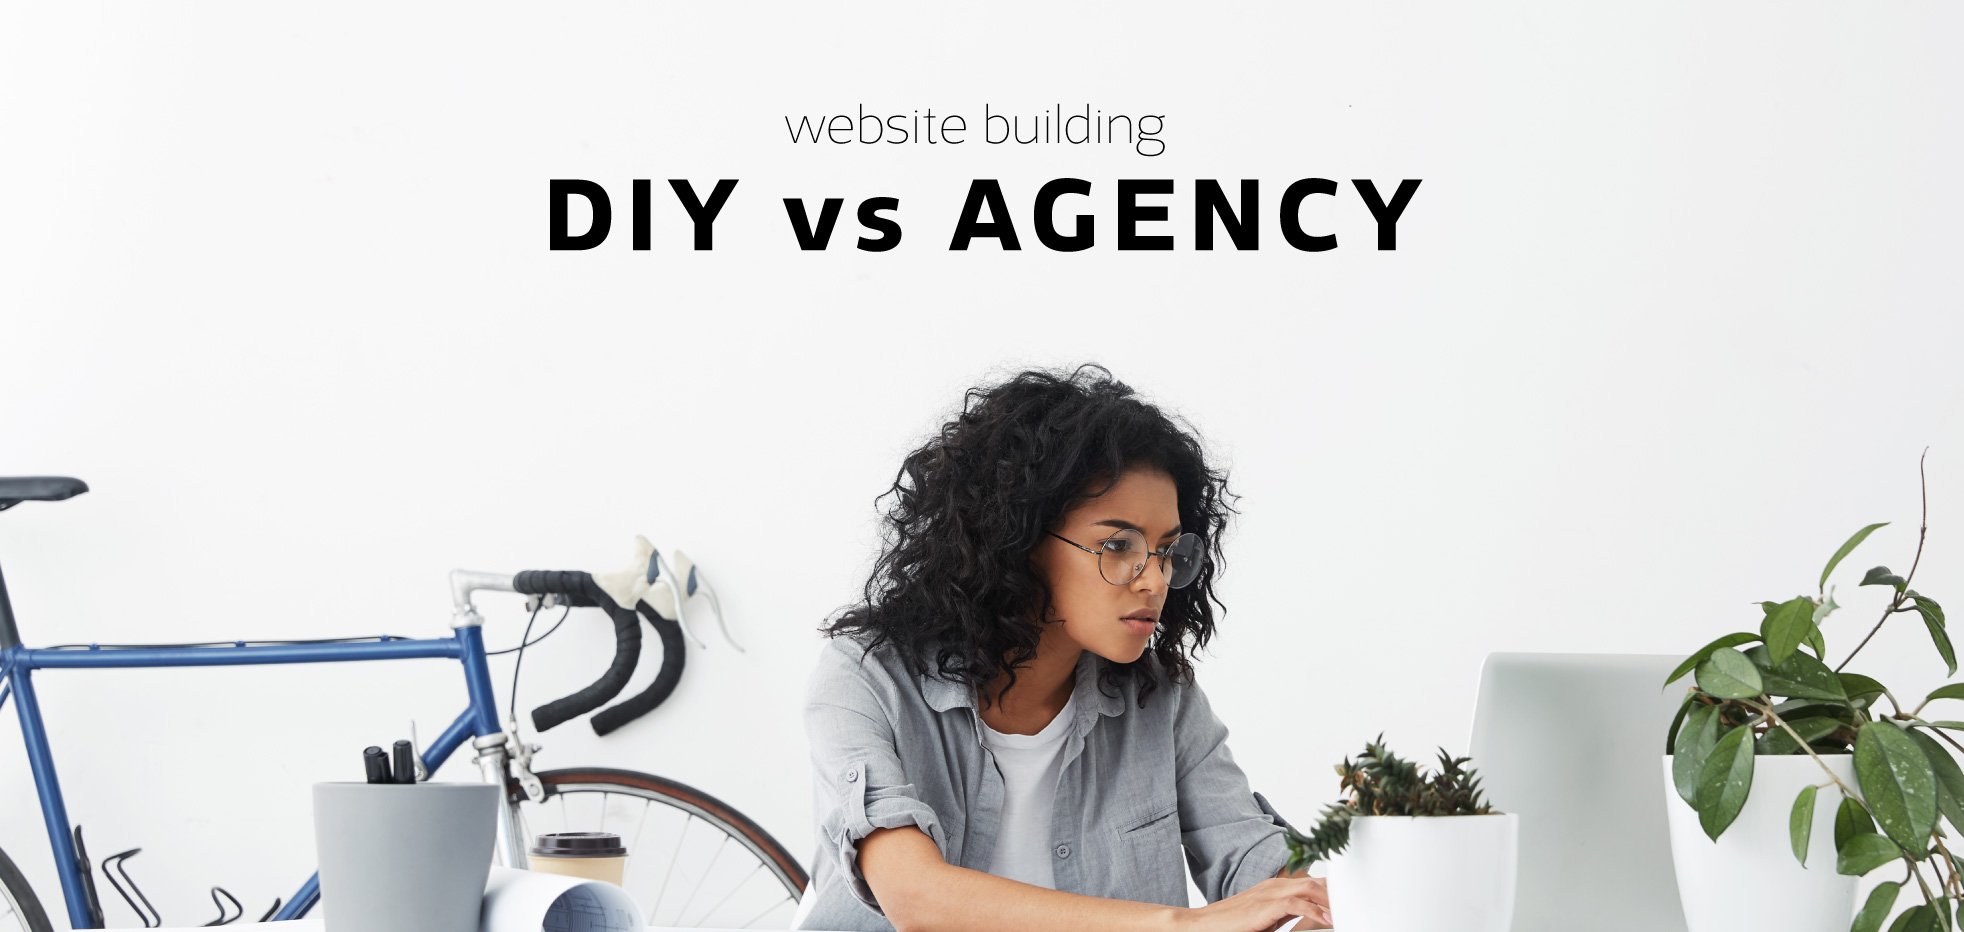 DIY website vs. agency website: which is right for your business?